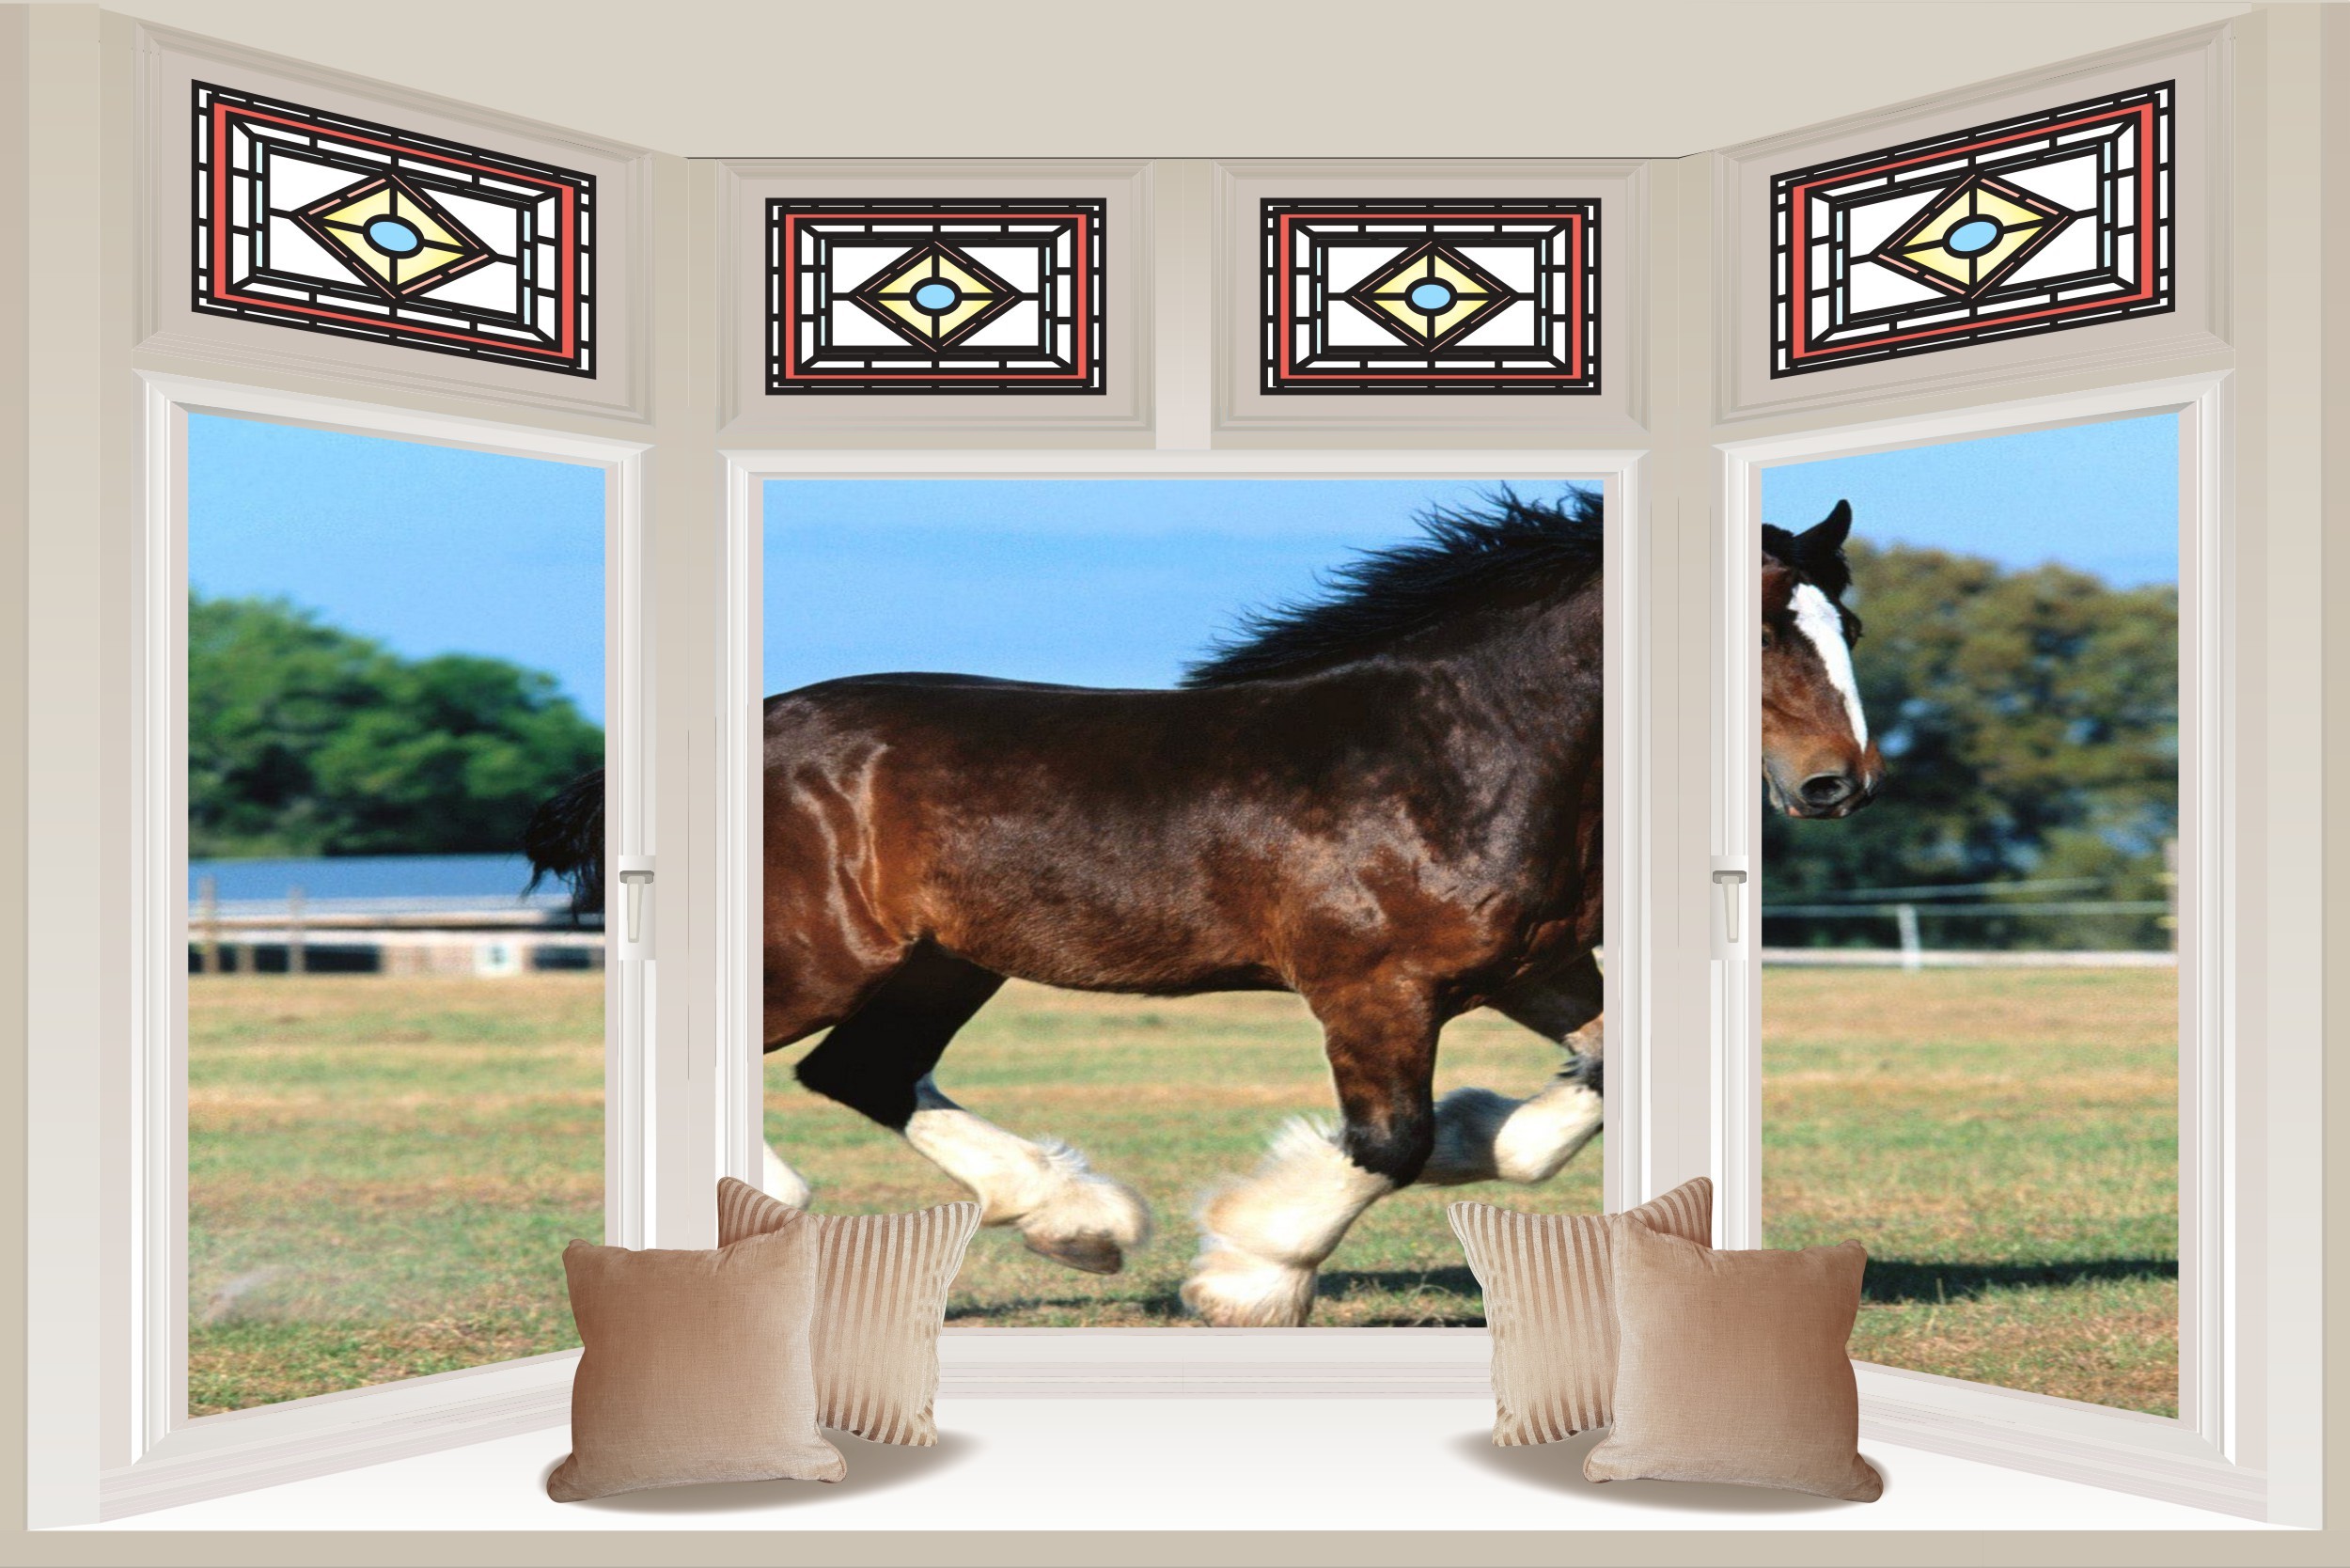 2500x1668 Details about Huge 3D Bay Window Shire Horse Running View Wall Stickers  Mural Wallpaper 187